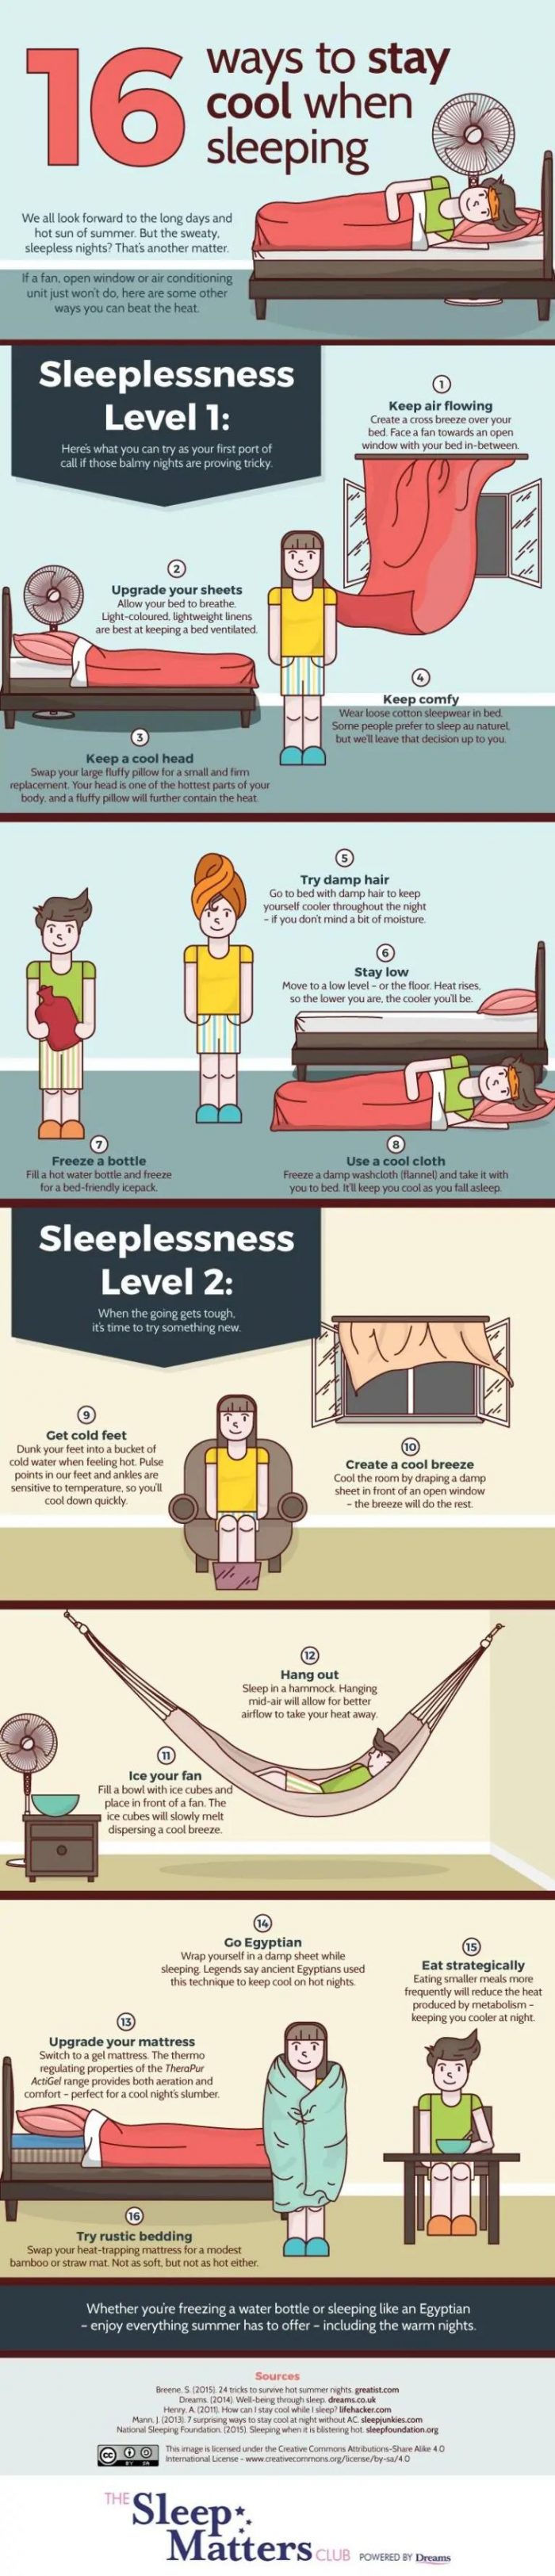 ways to stay cool when sleeping